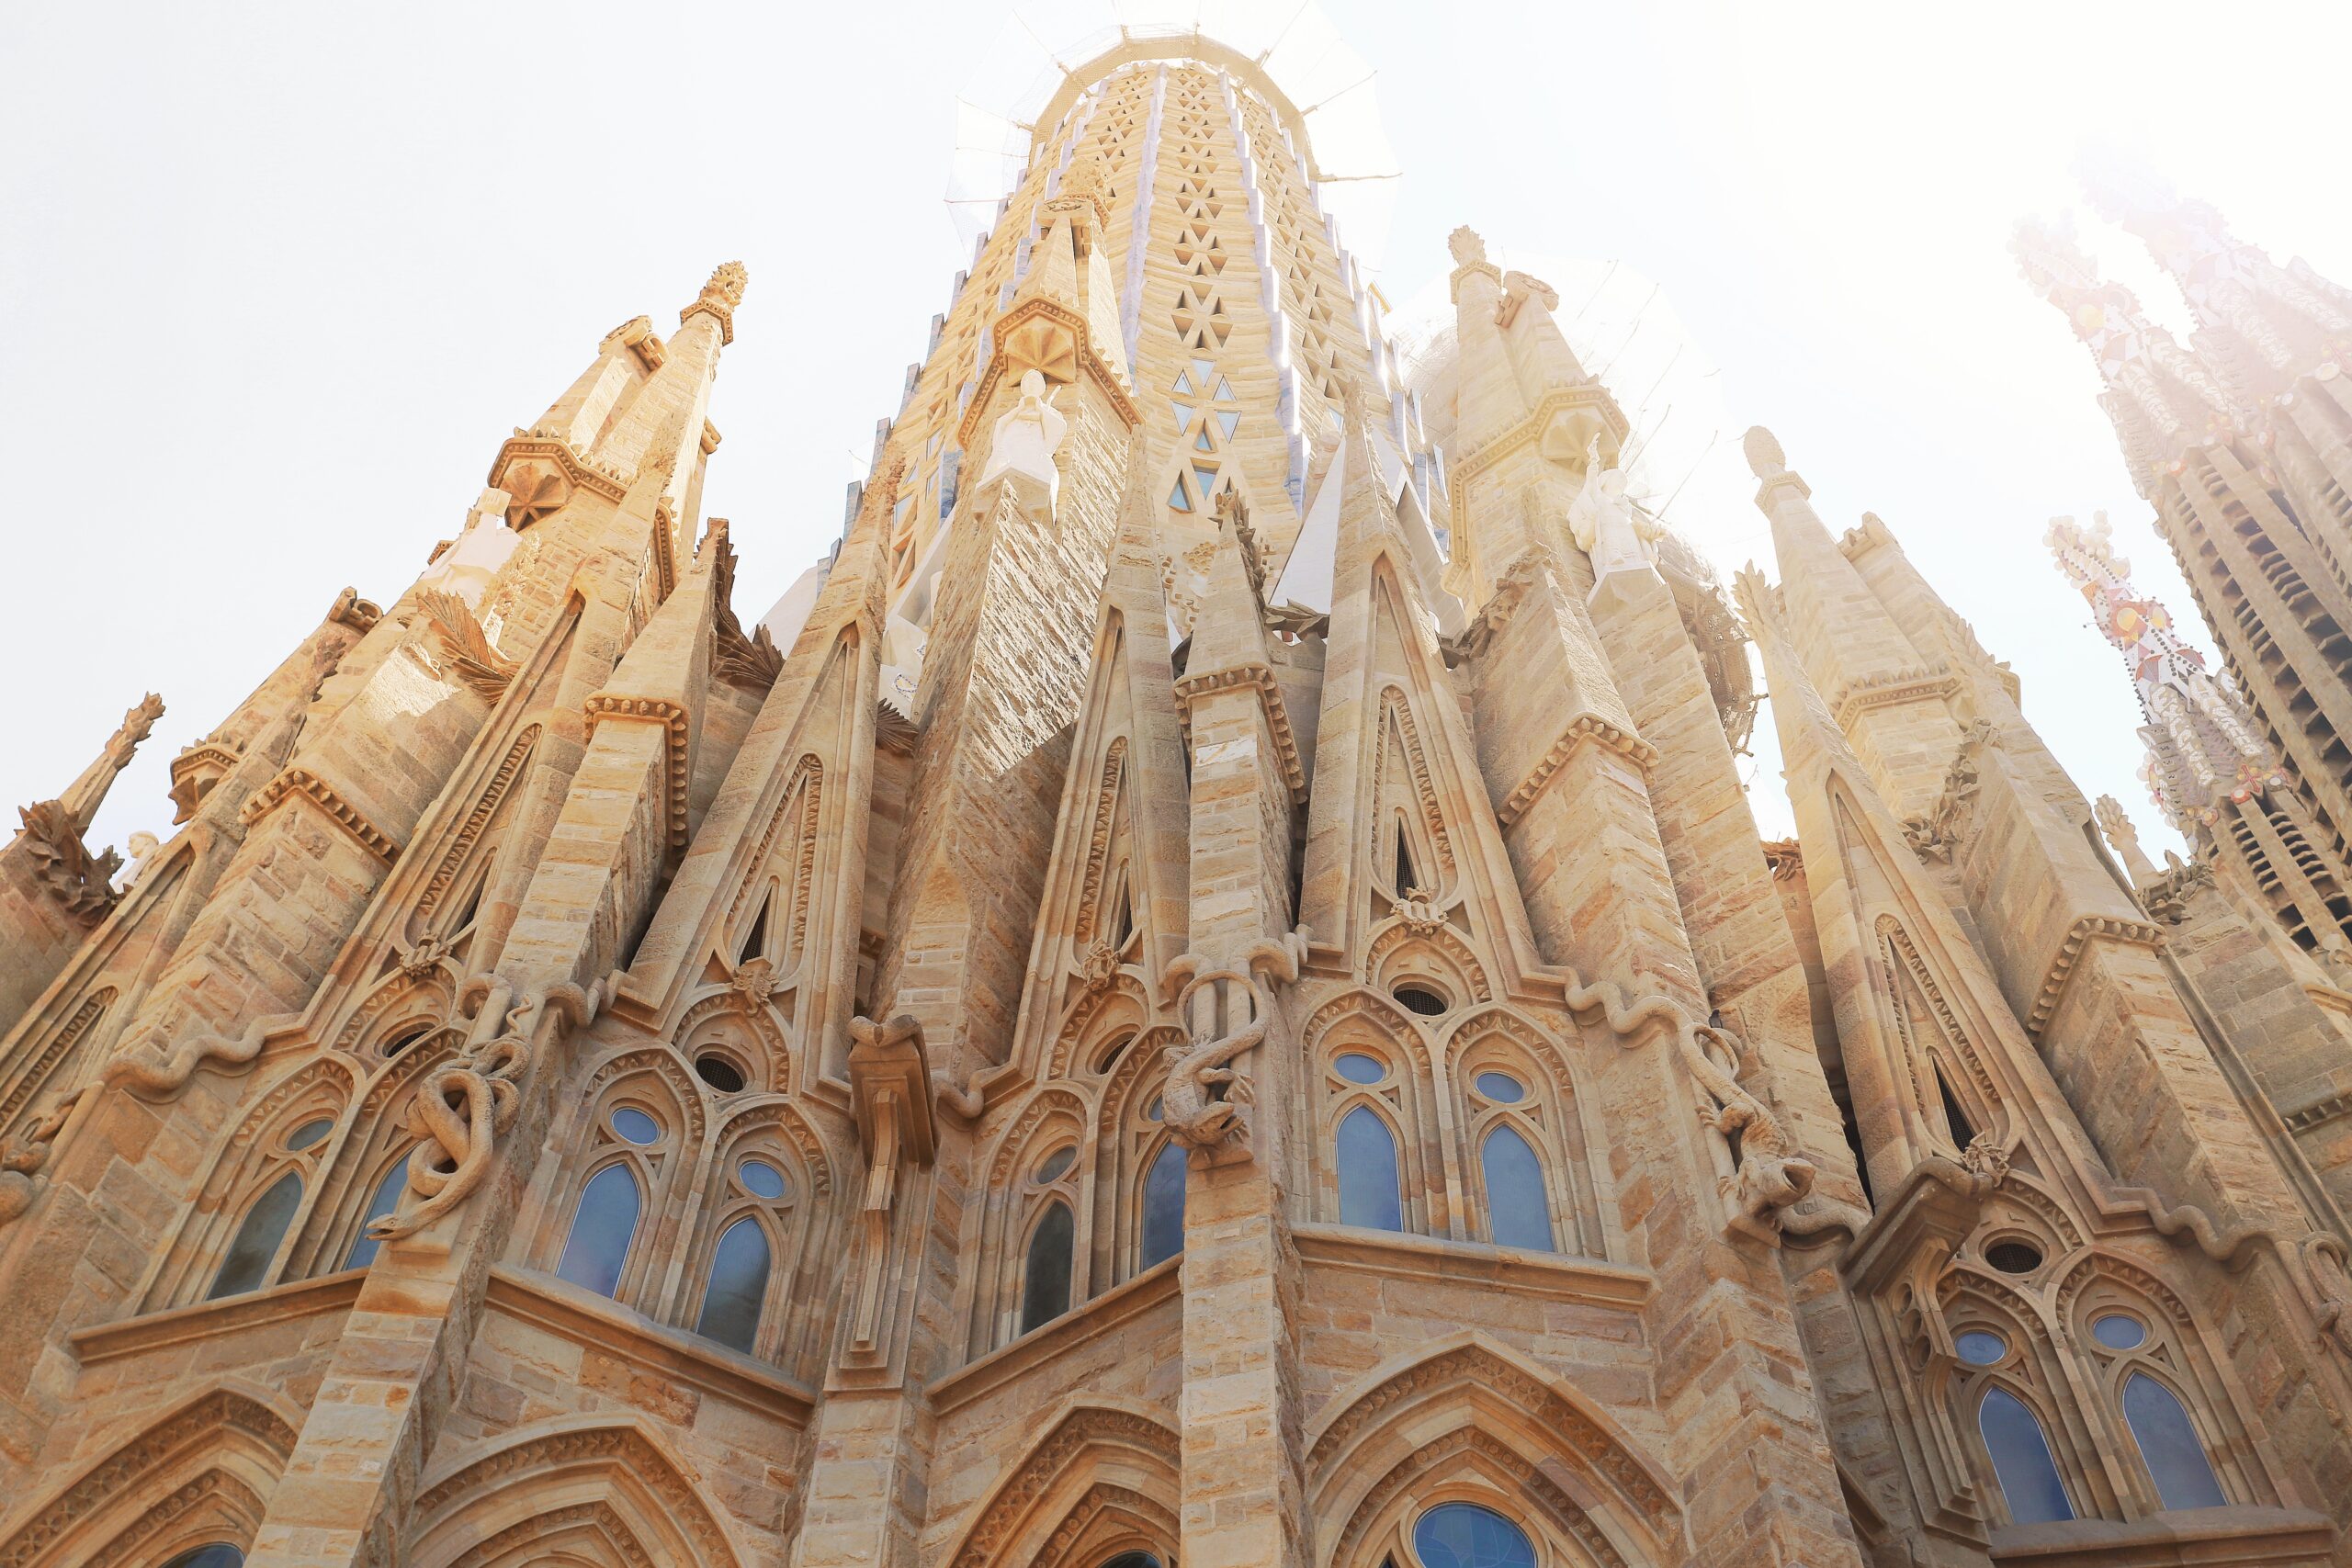 Spain's famous Sagrada Familia isn't free. But what payment method should you use in Spain?